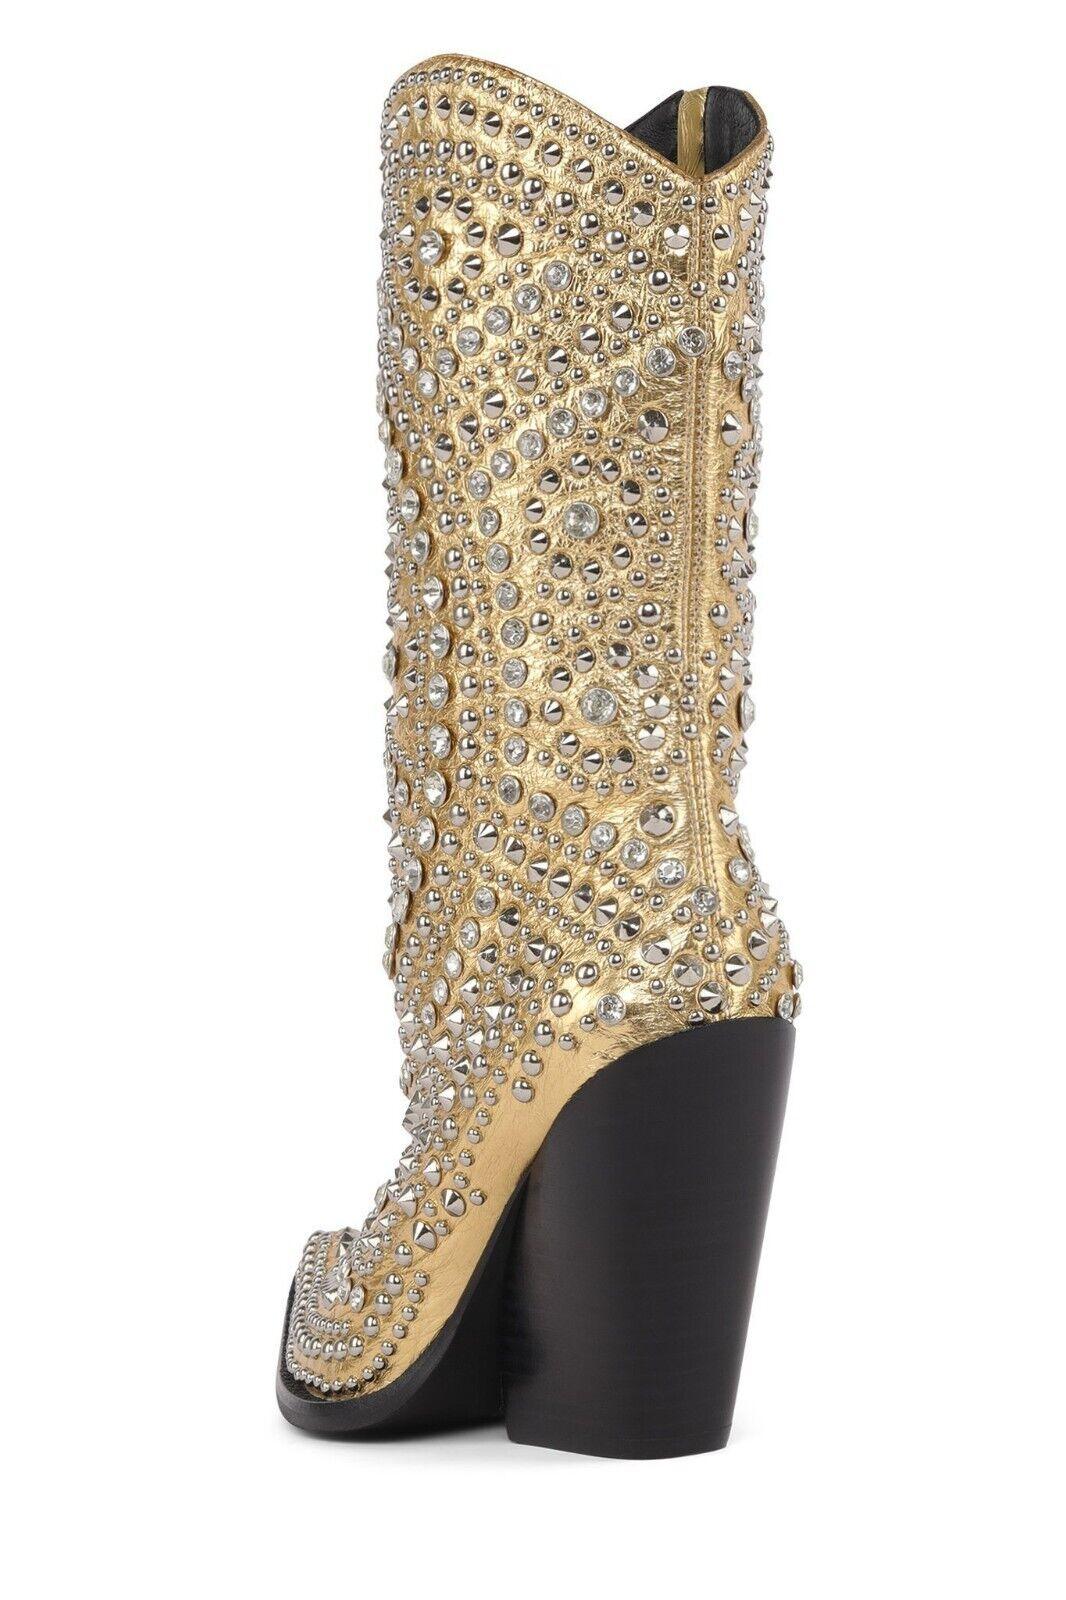 Jeffrey Campbell Gold Western Stud and Rhinestone Cowboy Boots Size 9 - SVNYFancy